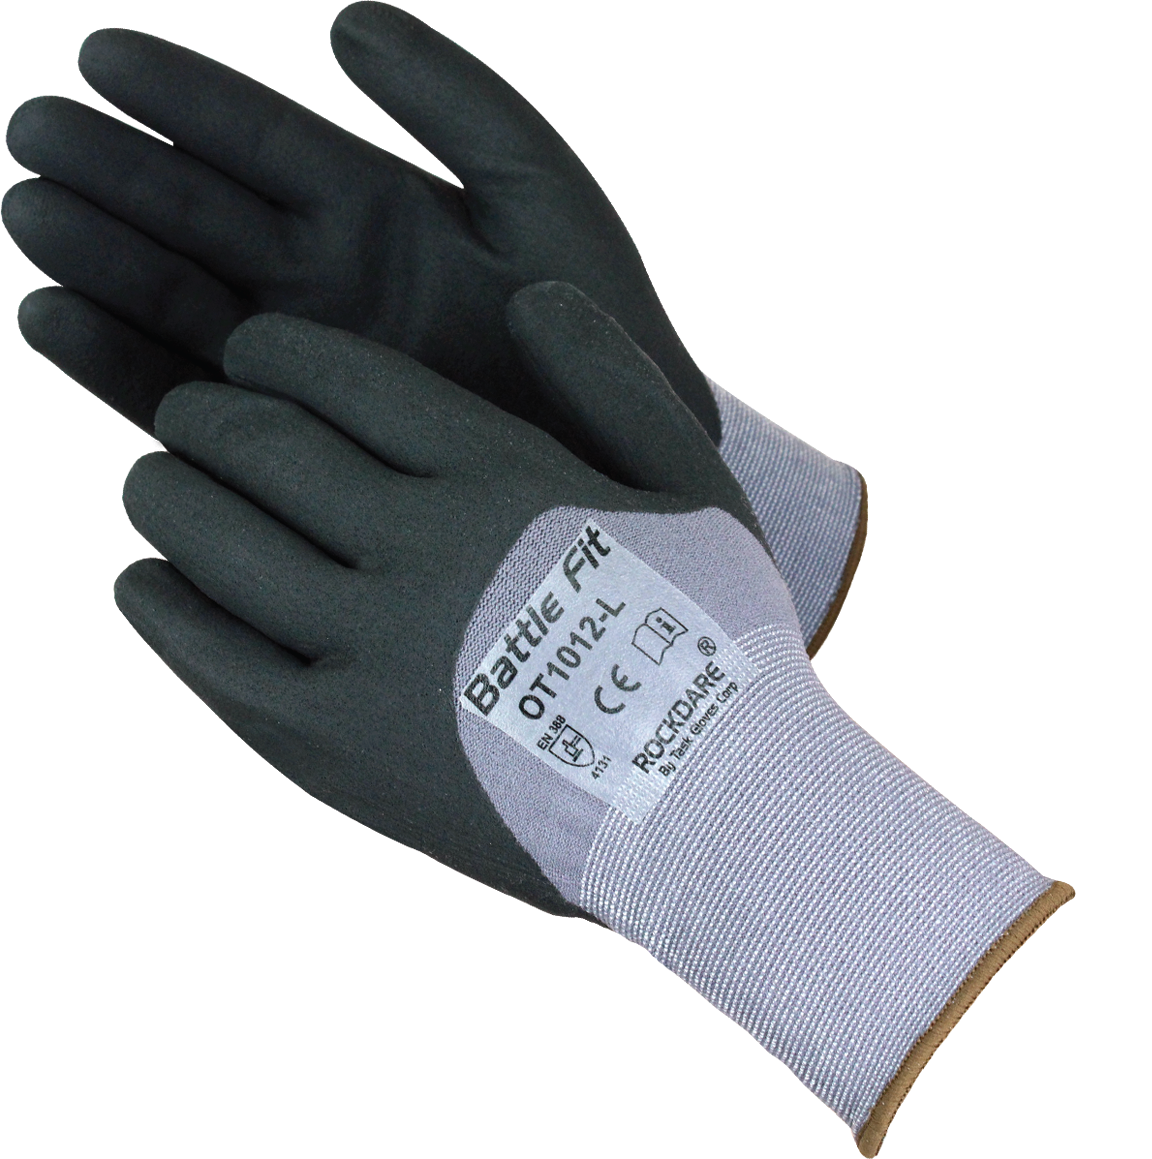 Task Gloves-Black Micro-Foam Nitrile Knuckle coated, 15G Knit Gloves.-eSafety Supplies, Inc